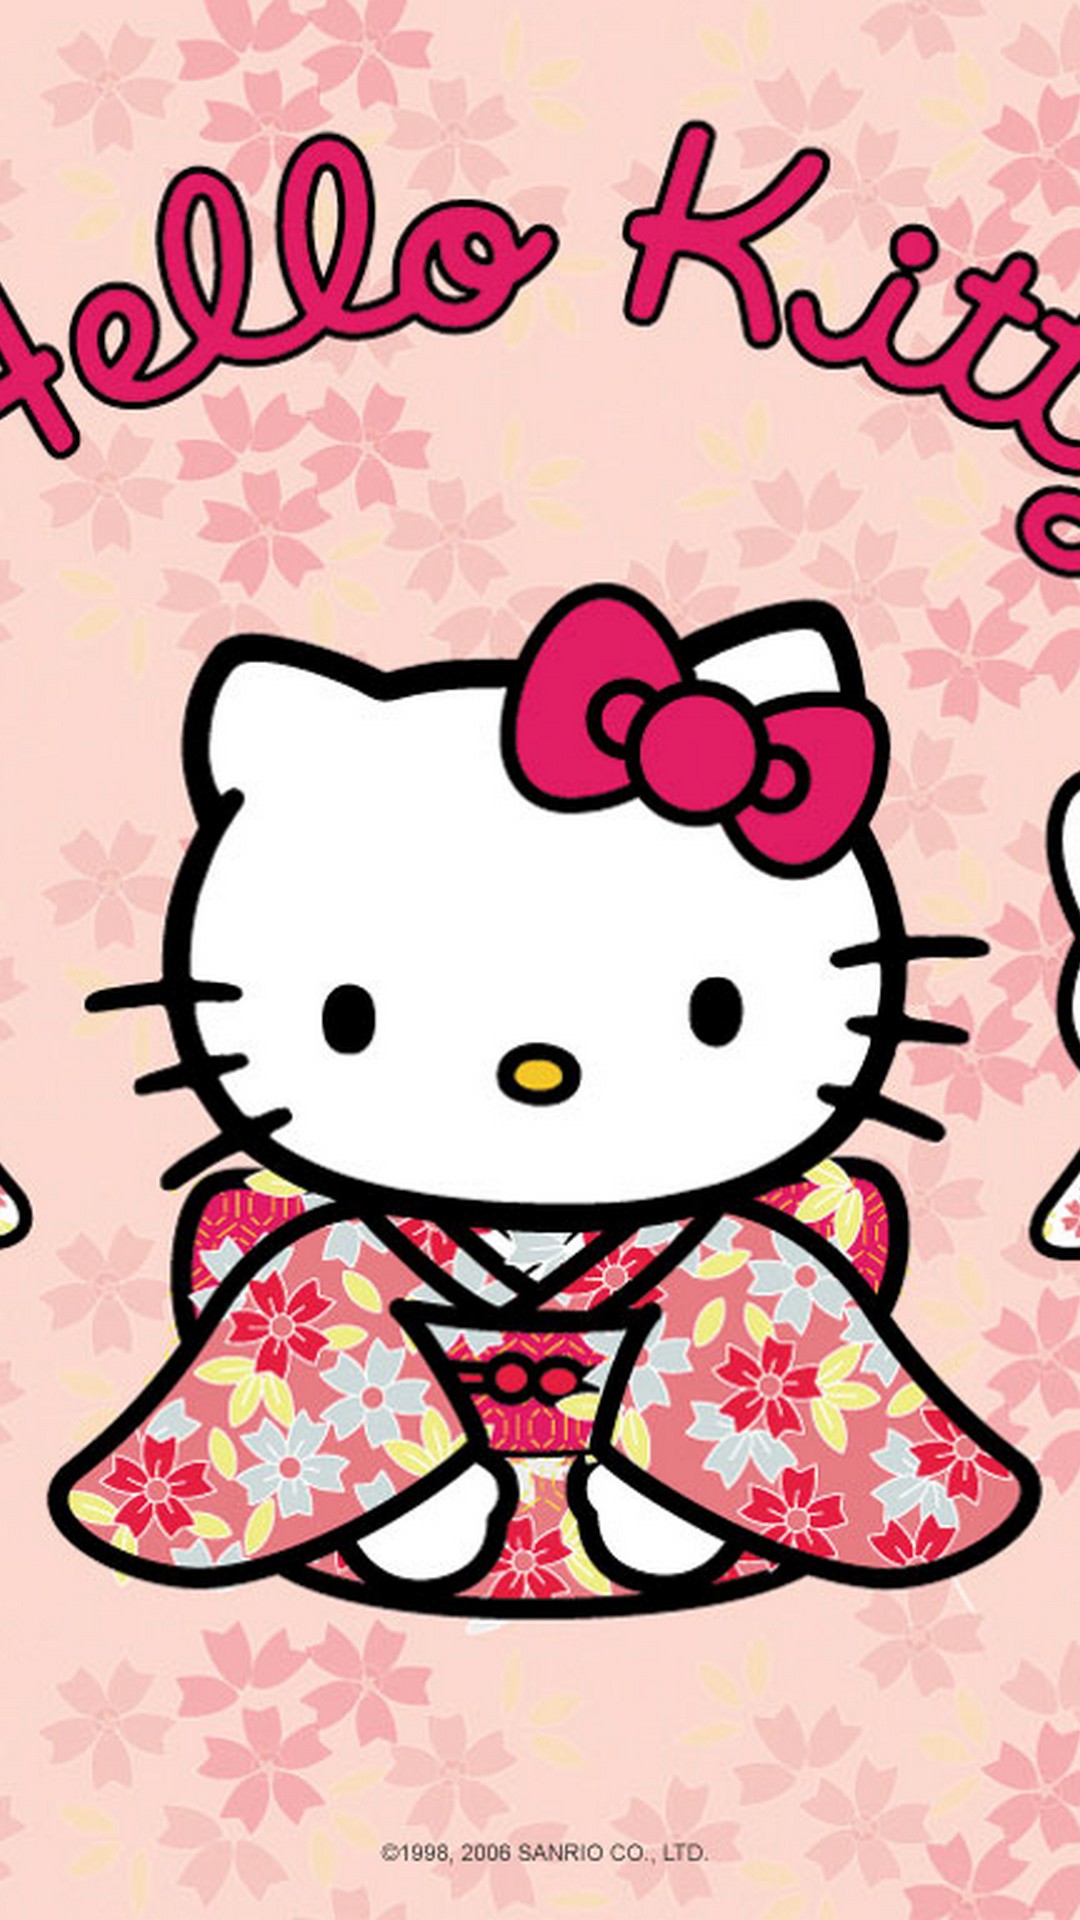 Wallpaper iPhone Hello Kitty Characters with image resolution 1080x1920 pixel. You can make this wallpaper for your iPhone 5, 6, 7, 8, X backgrounds, Mobile Screensaver, or iPad Lock Screen